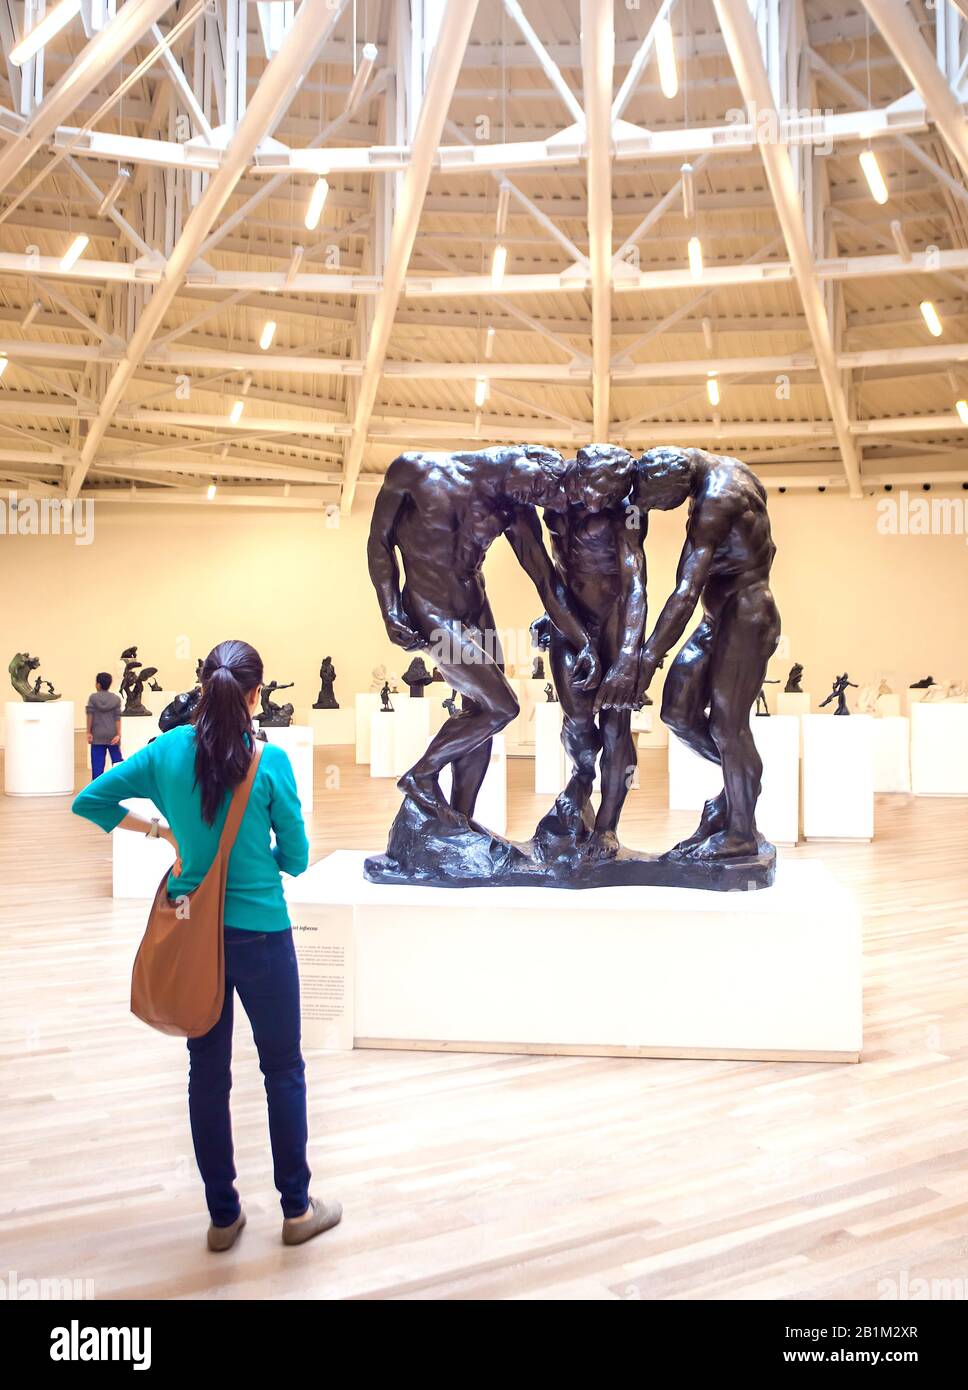 Adult looking at sculptureThe Three Shades by Aguste Rodin in the Soumaya Museum, Polanco, Mexico City, Mexico Stock Photo